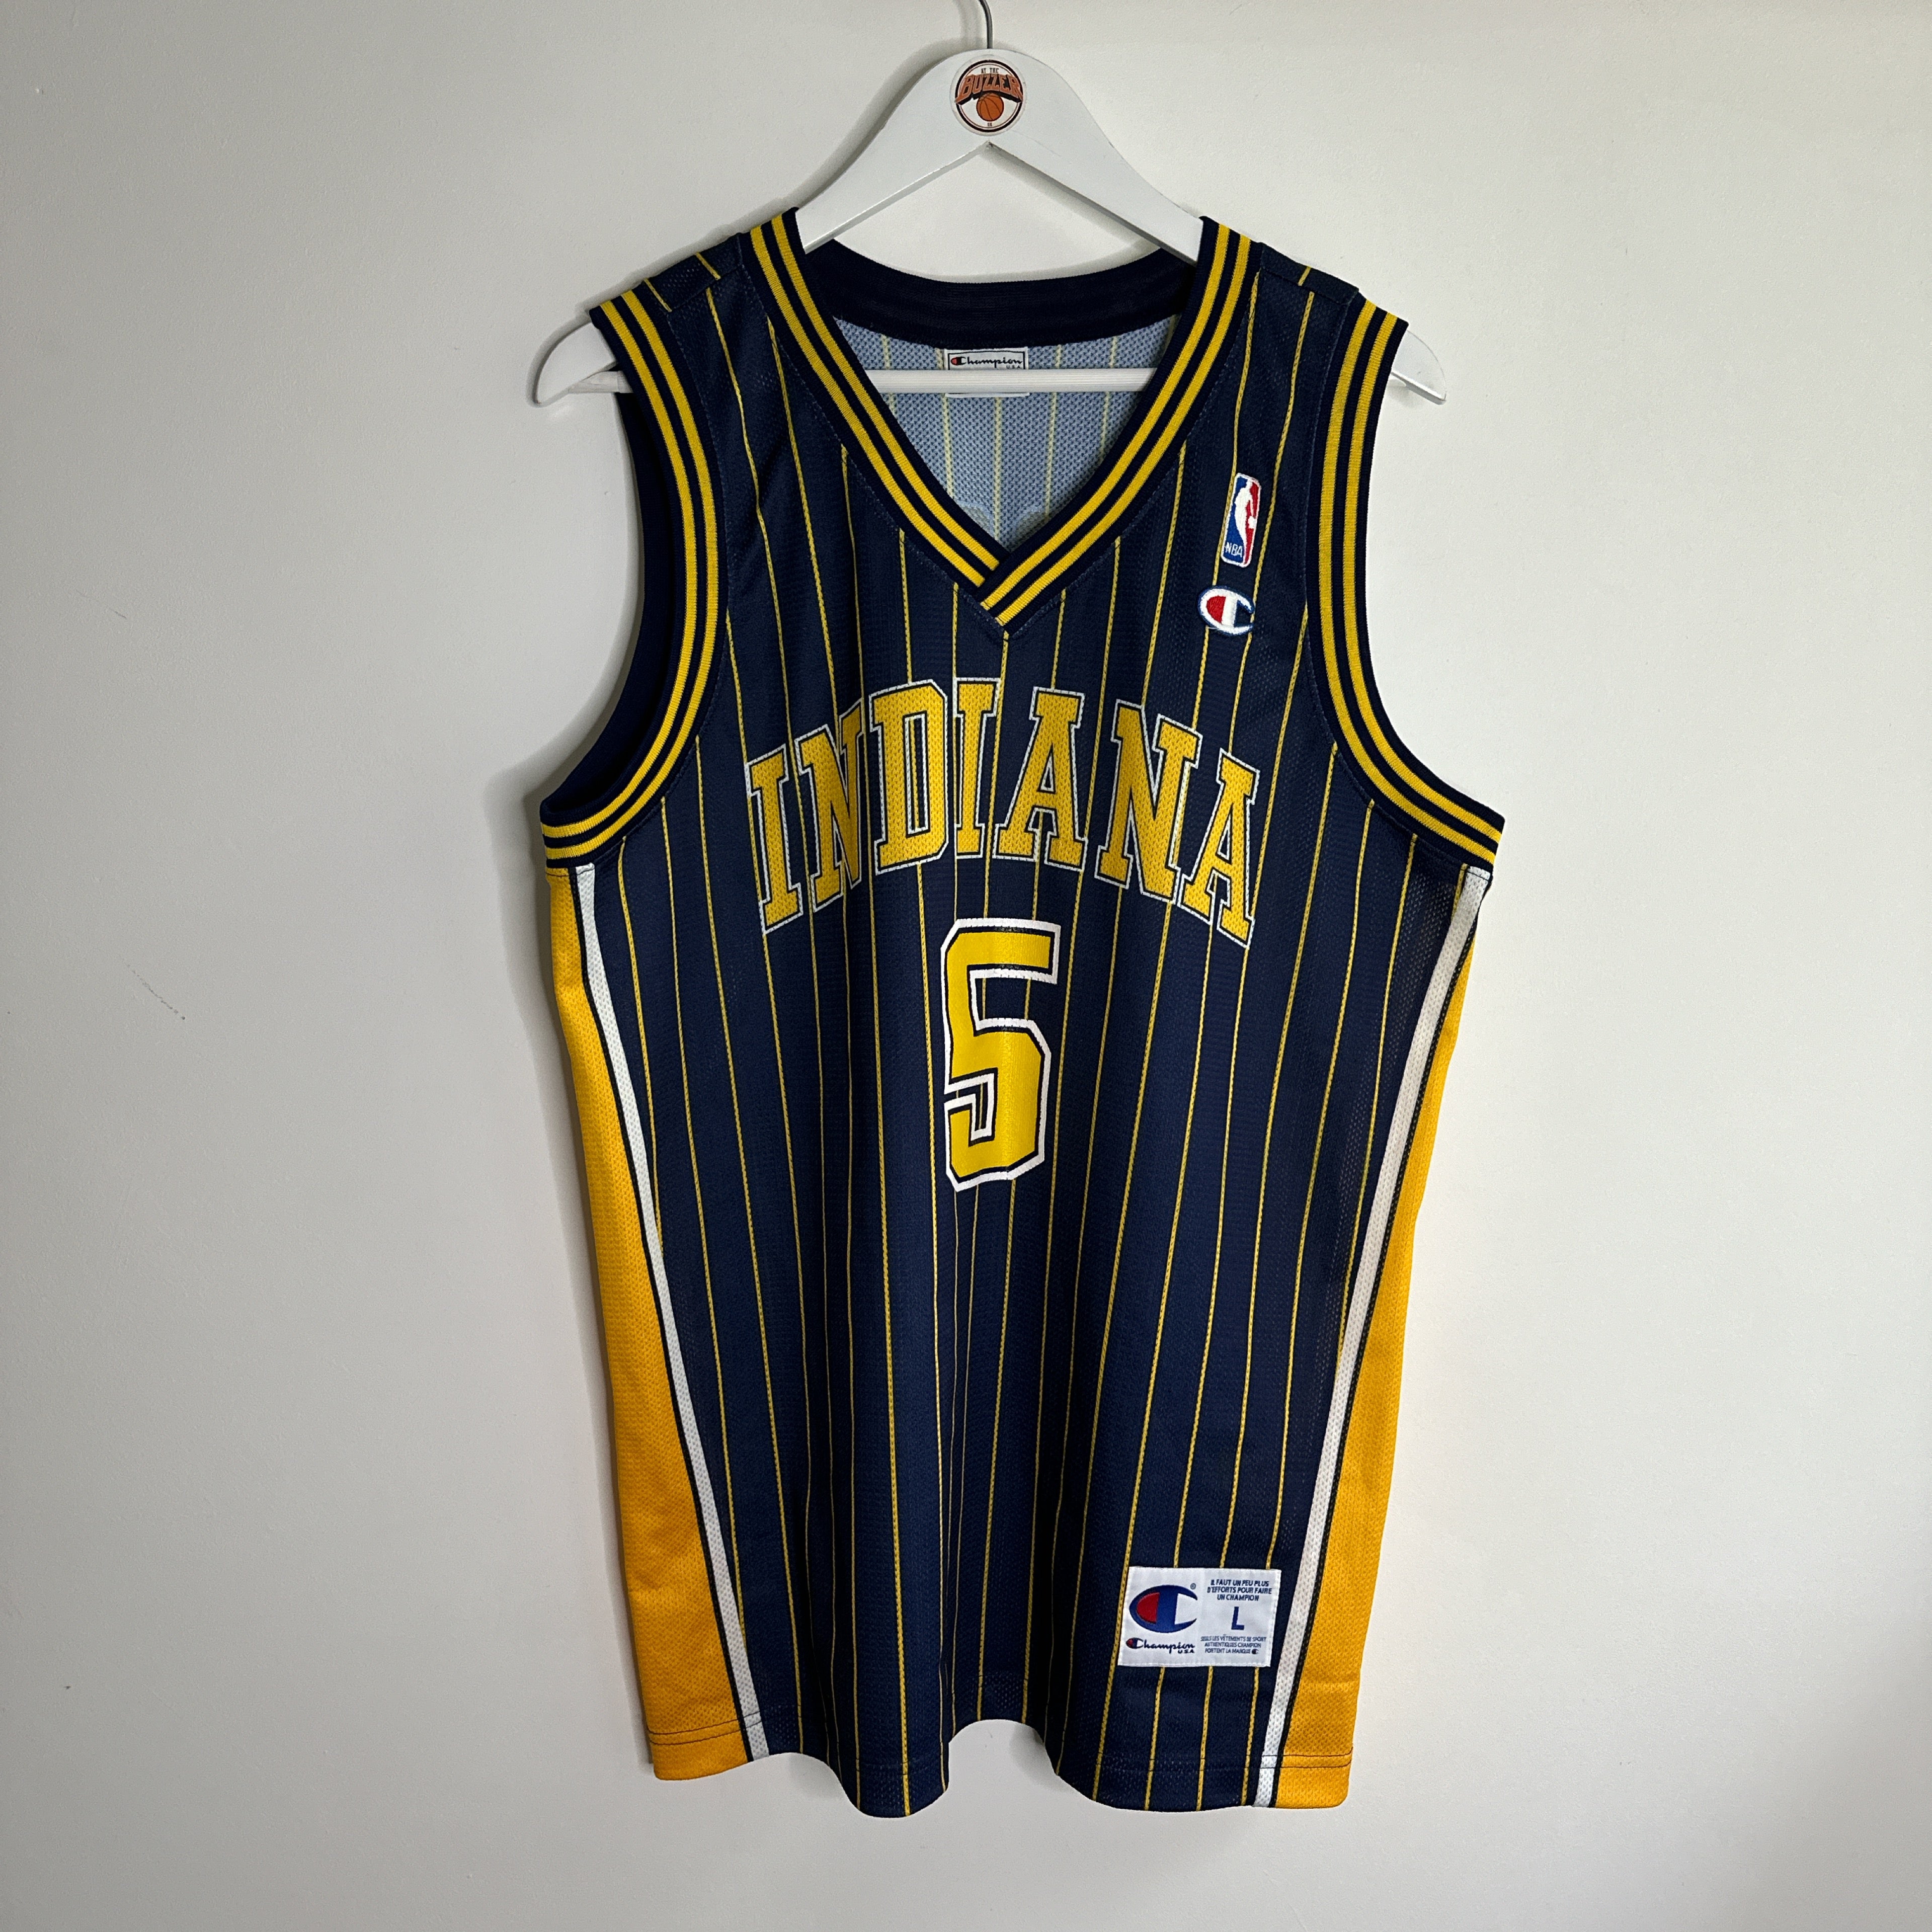 Indiana Pacers Jaylen Rose Champion jersey - Large